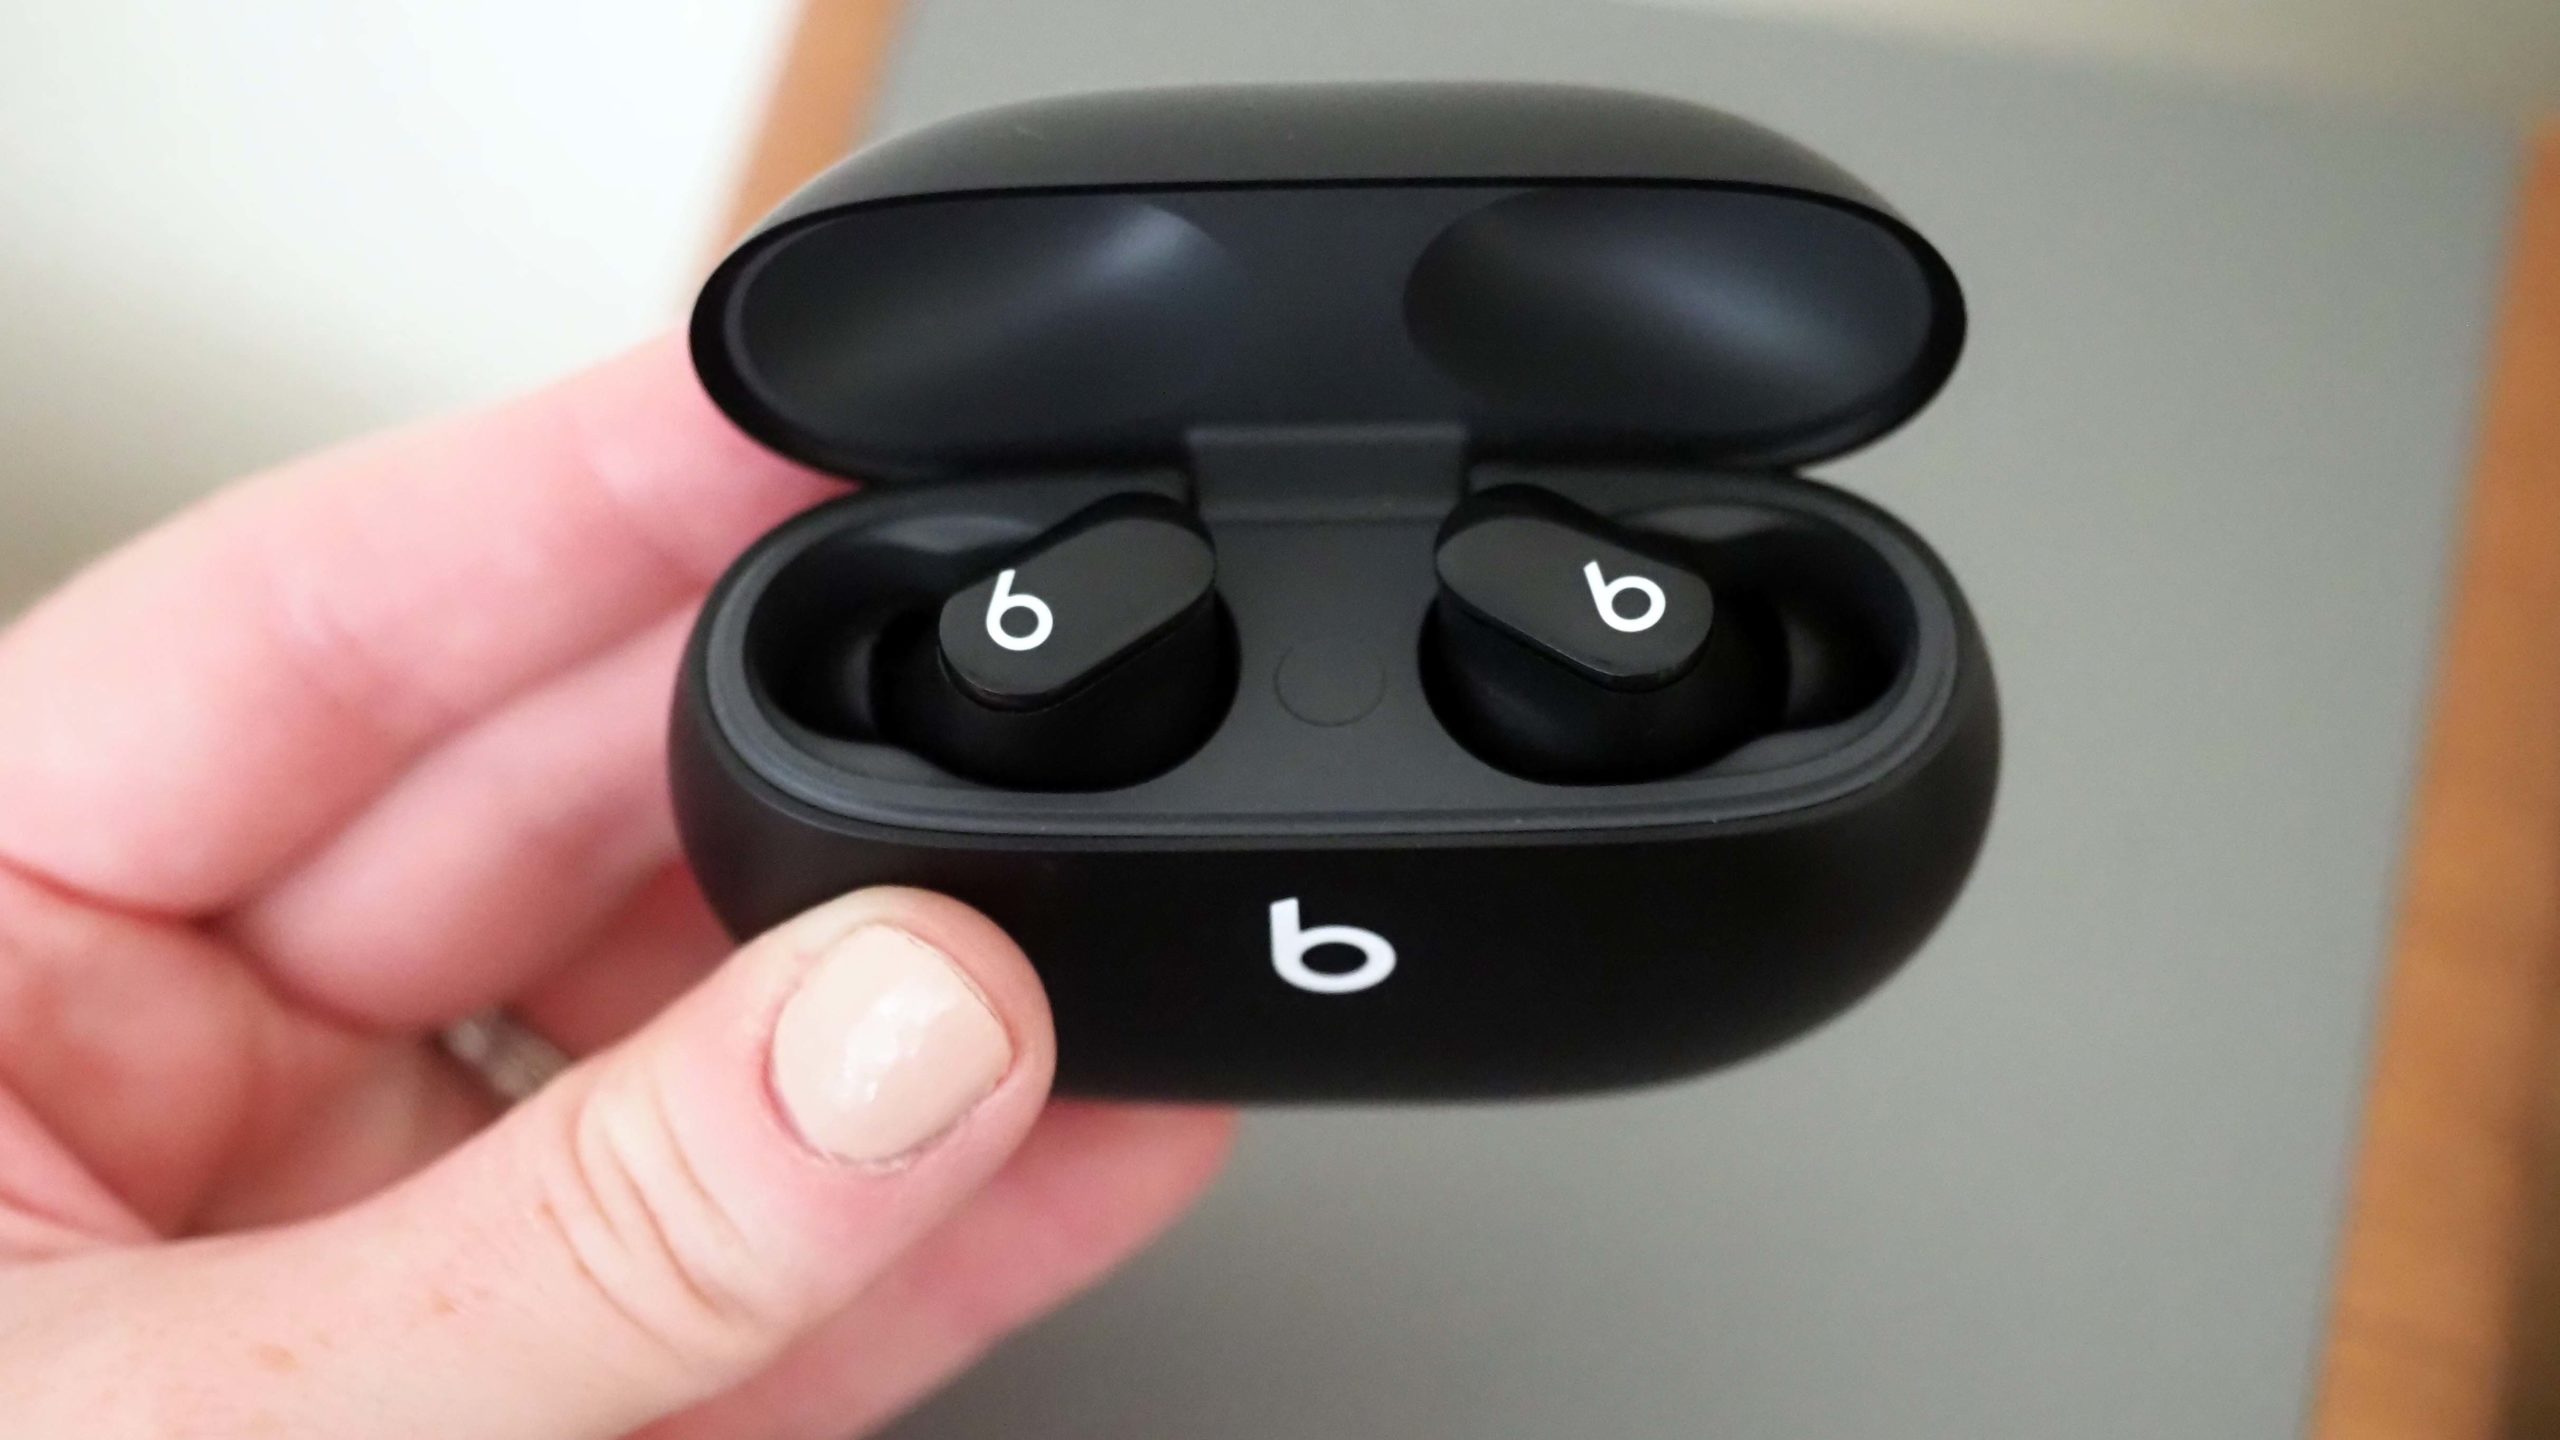 The Studio Buds can be paired to any device using the centre button. (Photo: Caitlin McGarry/Gizmodo)